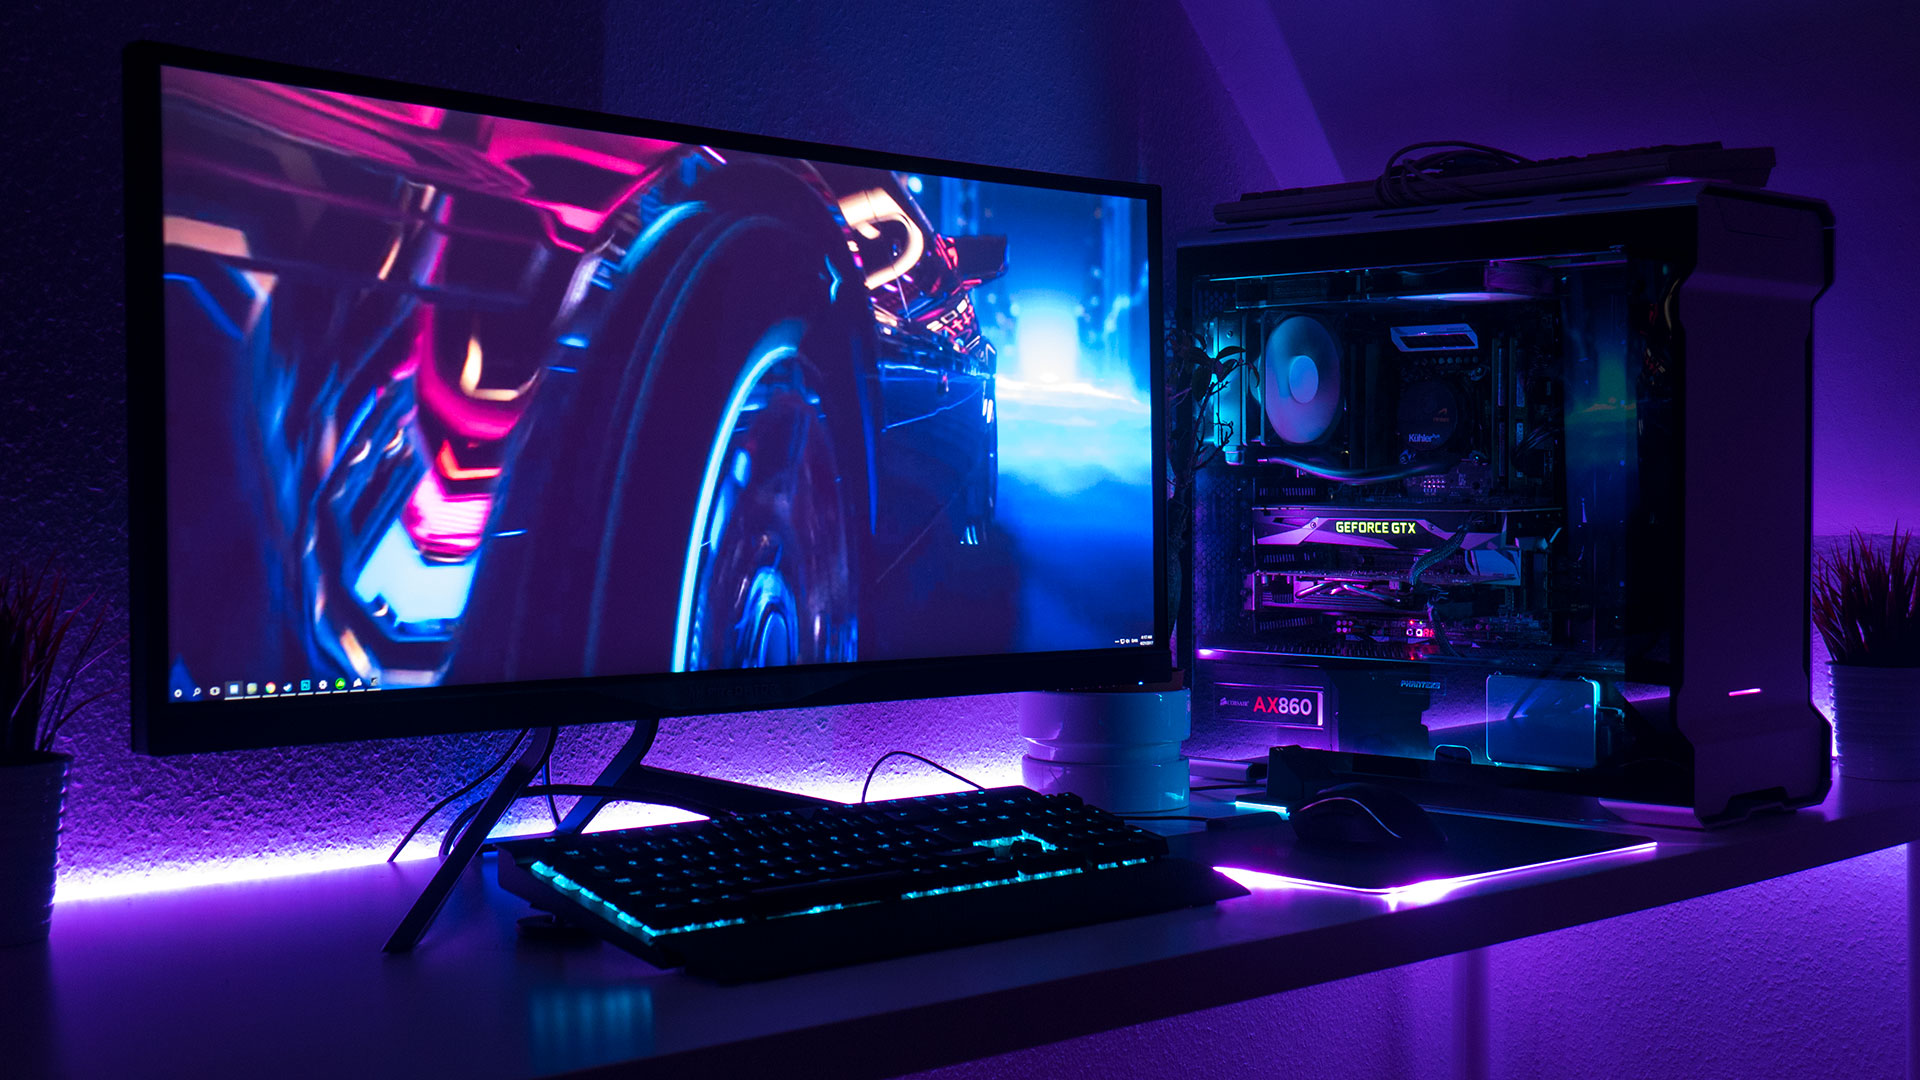 gaming setup wallpaper,display device,technology,computer monitor,lighting,electronic device